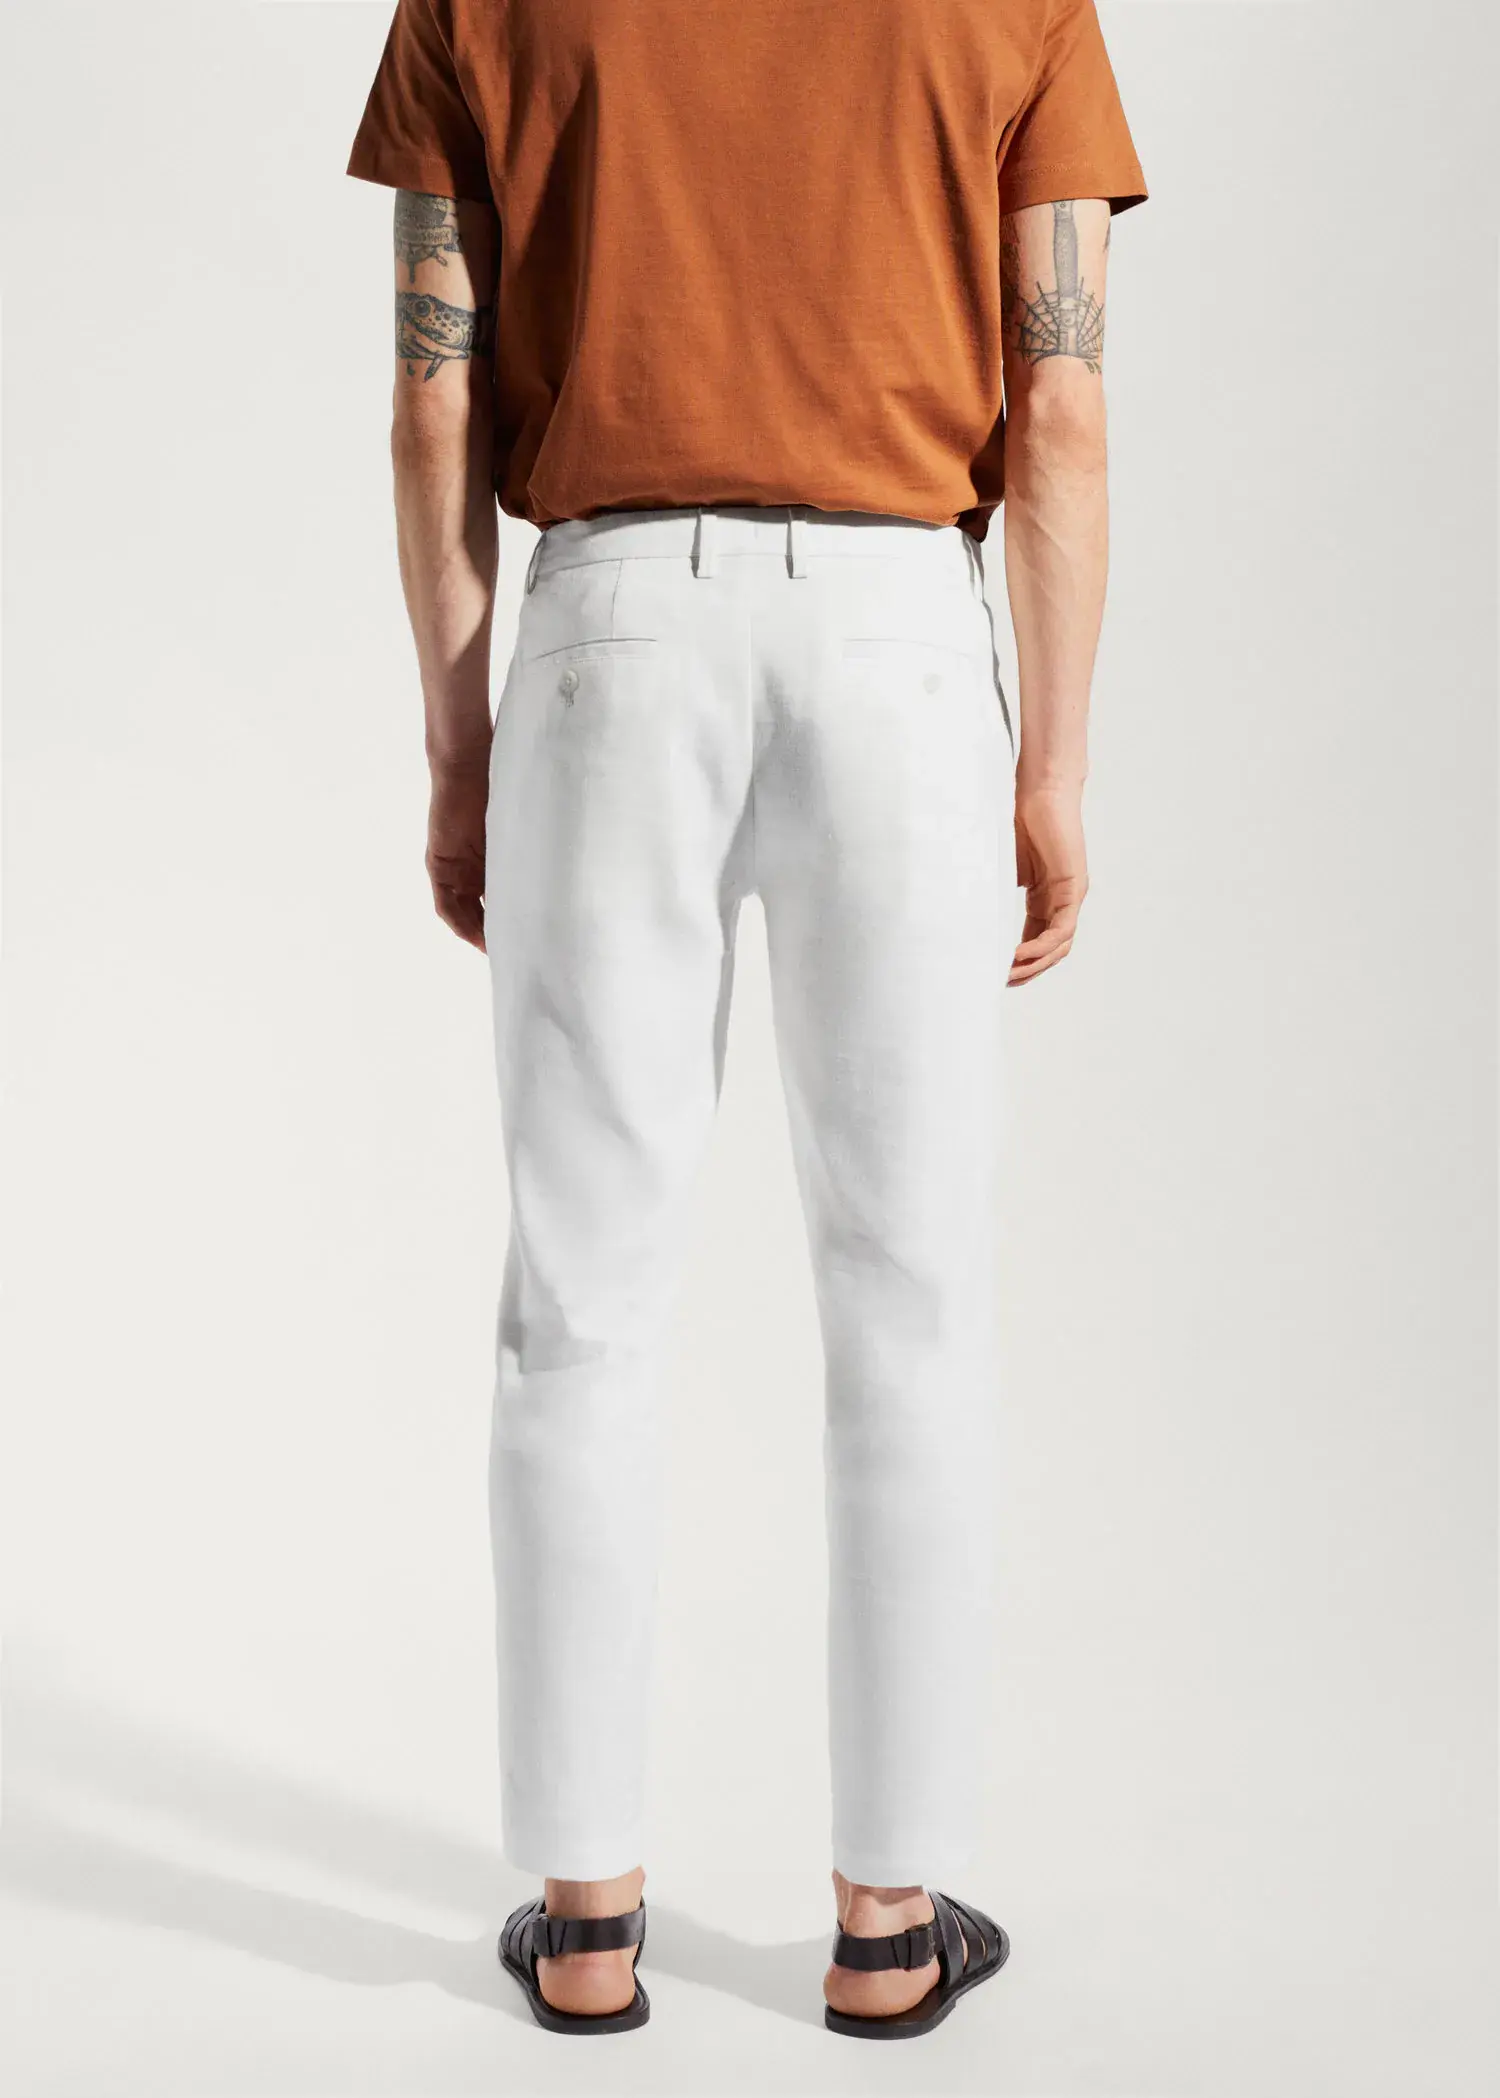 Mango Linen slim-fit trousers with inner drawstring. a person wearing white pants and a brown shirt. 